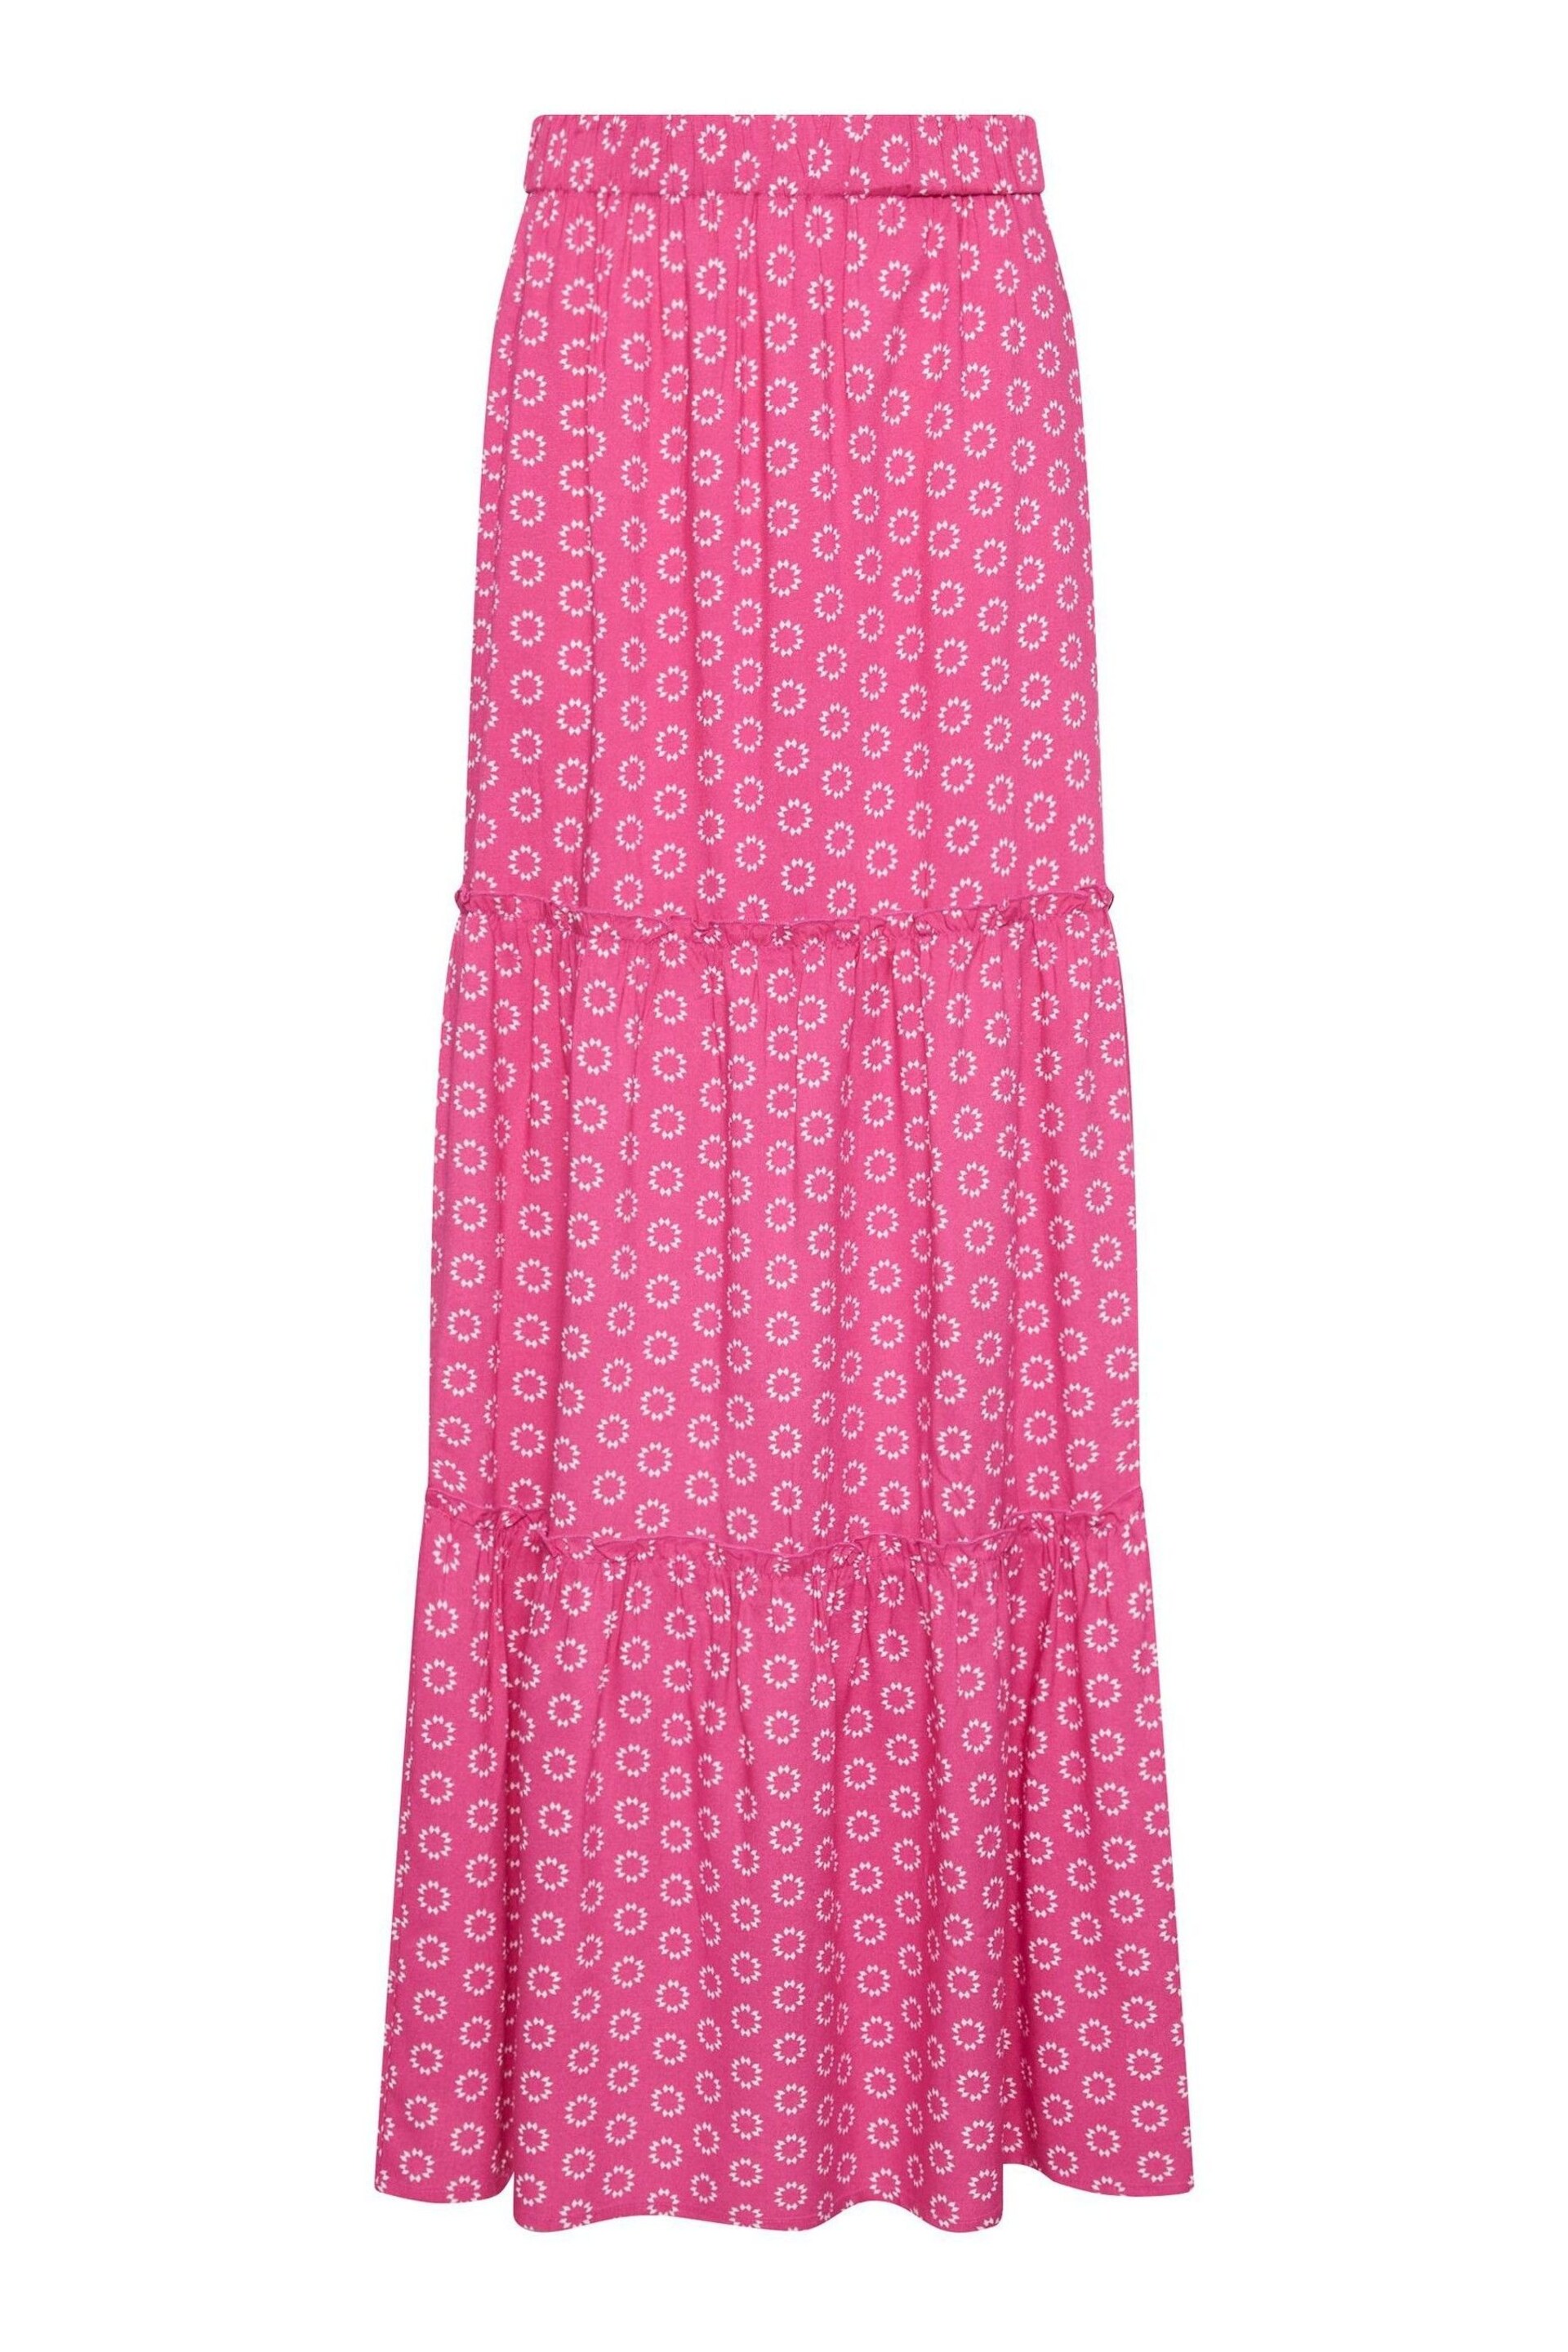 Long Tall Sally Pink Printed Tiered Maxi Skirt - Image 5 of 5